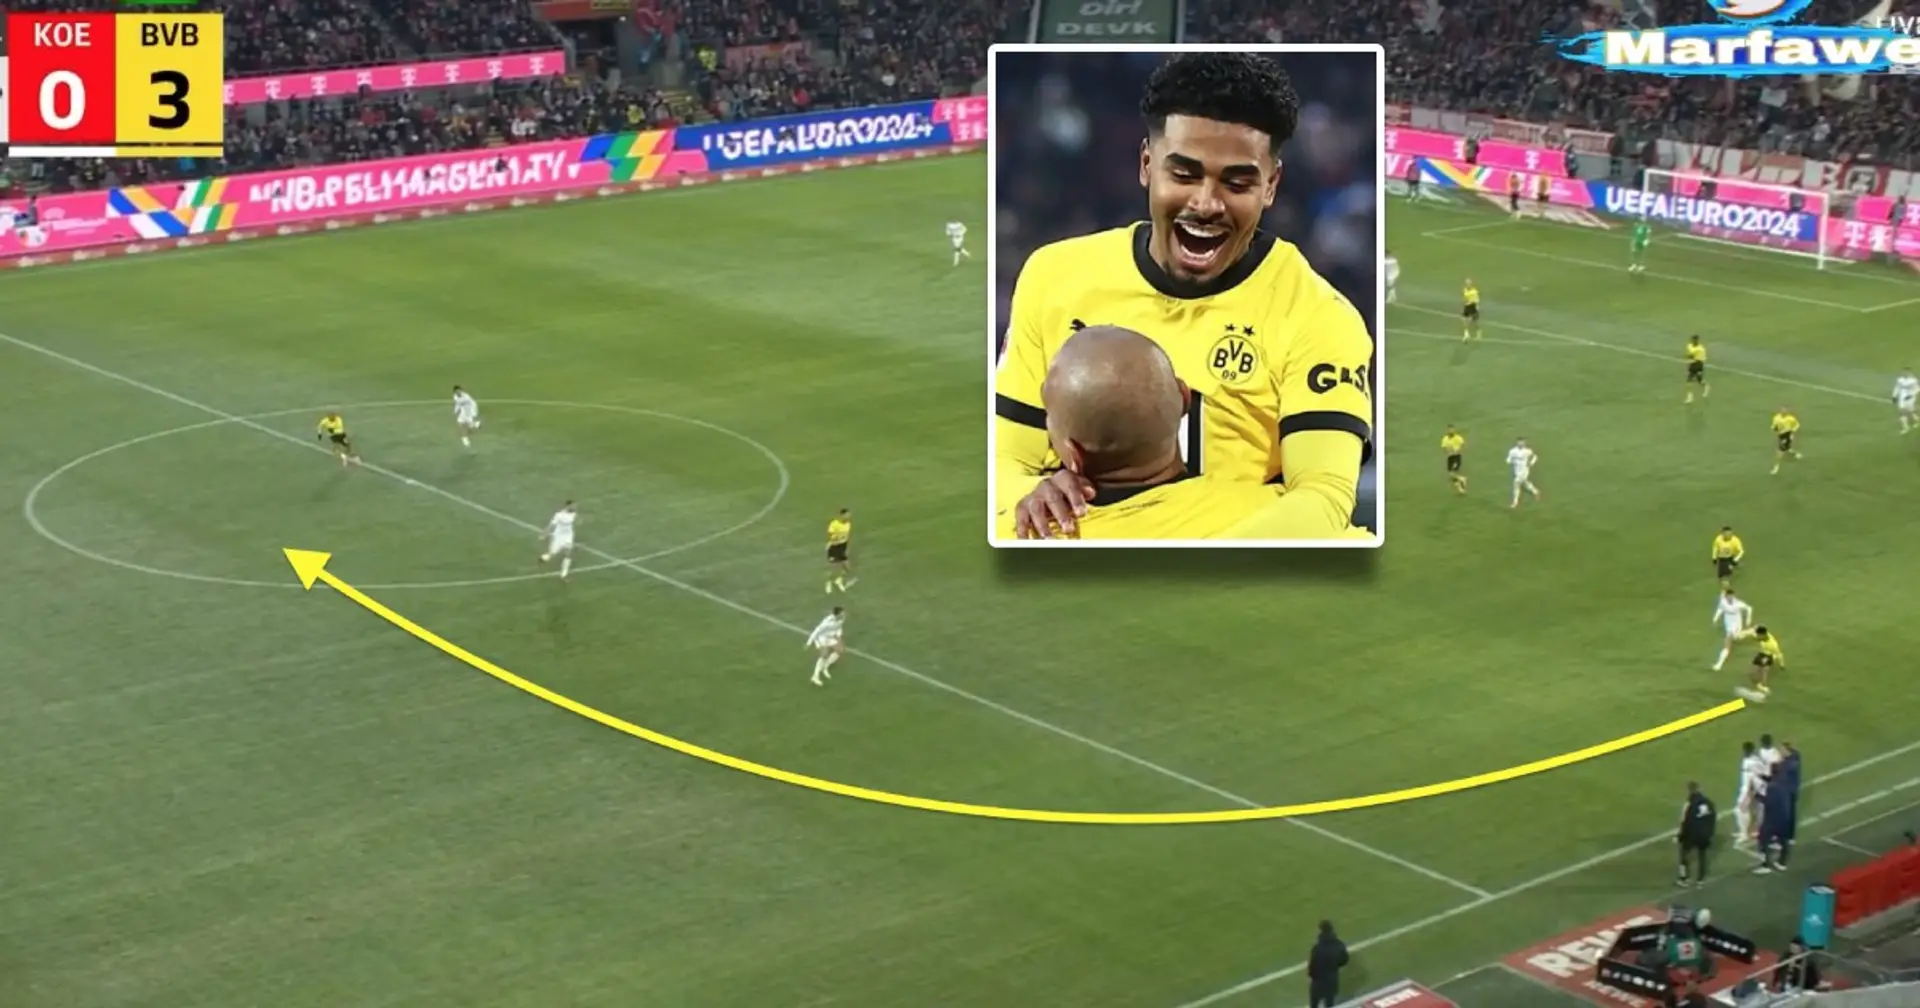 Maatsen gets assist for Dortmund in his second league start (video)